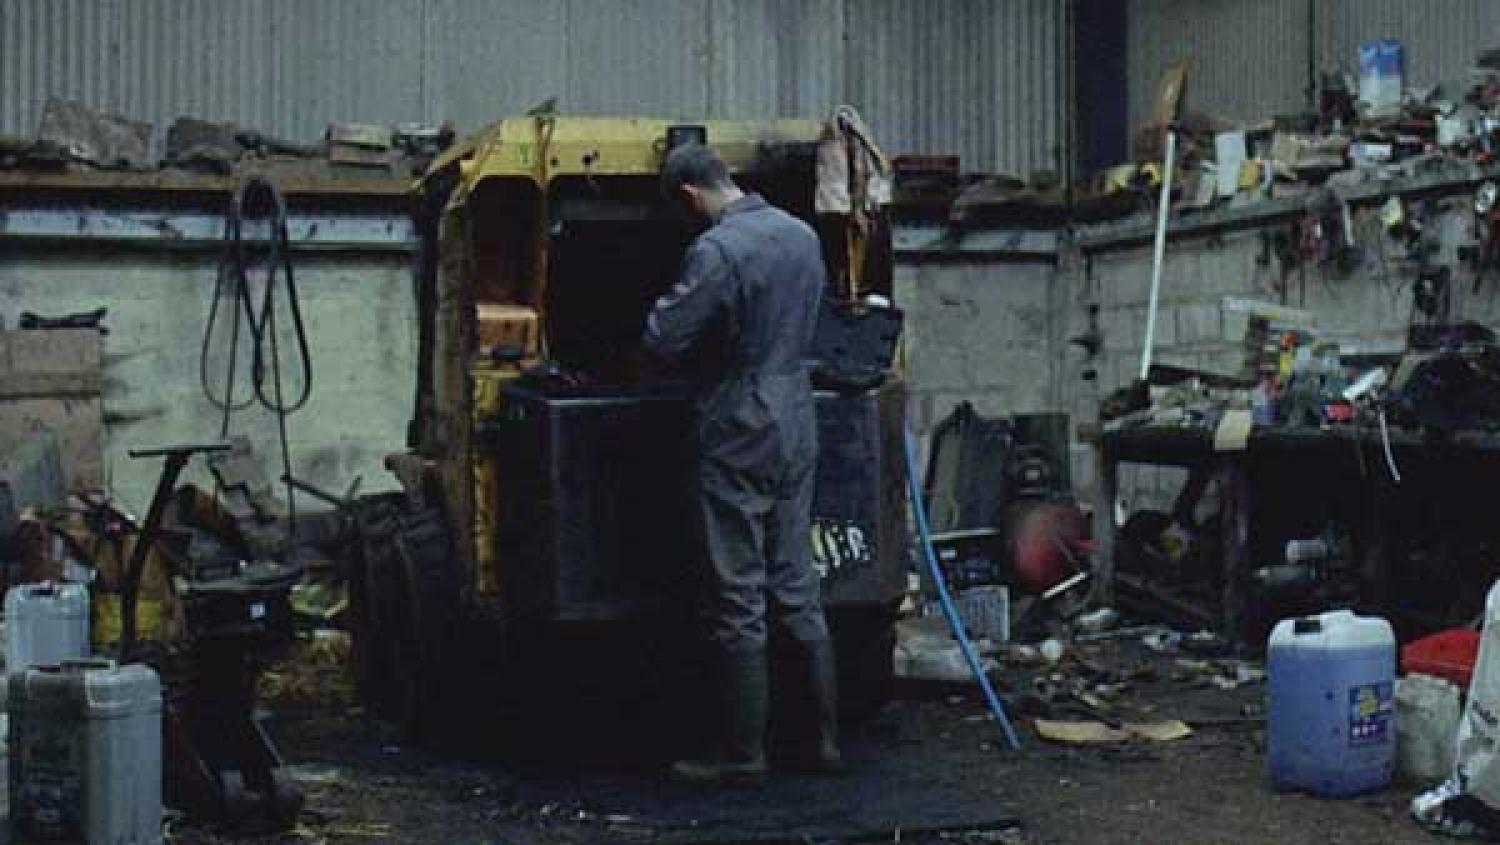 A still from the film 'Landline' showing a young farmer doing maintenance on his Land Rover